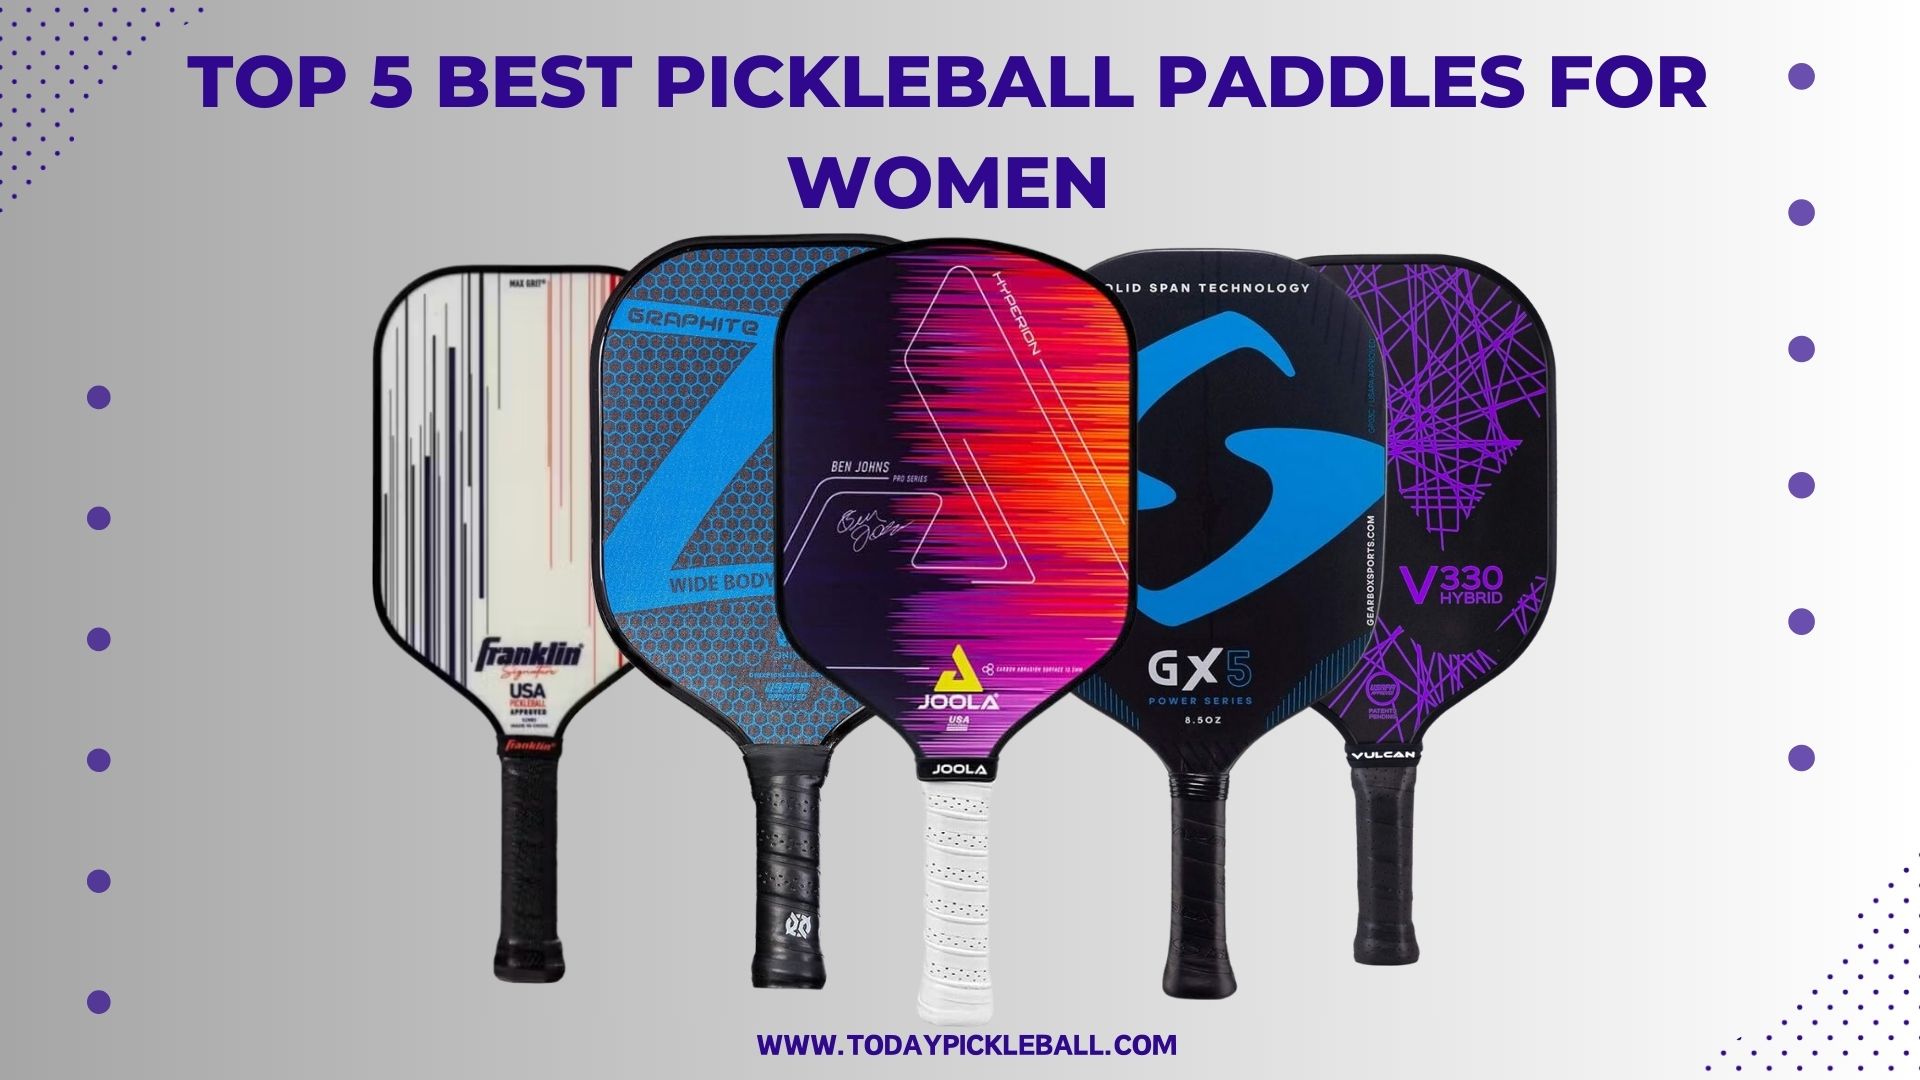 here is the image of some of the Best pickleball paddles For Women